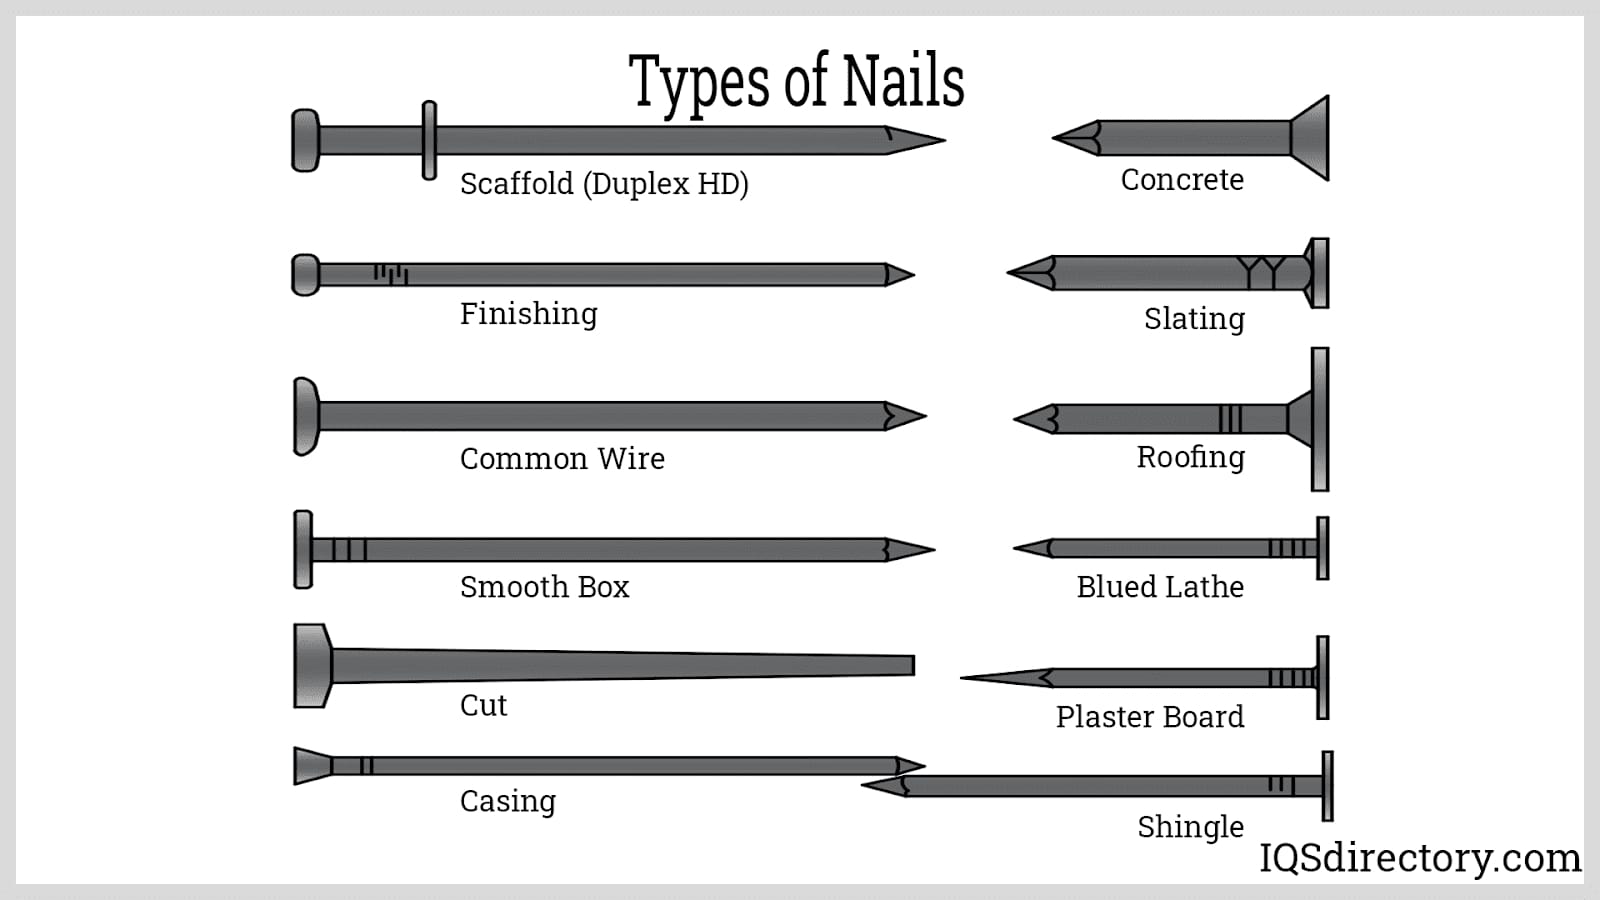 Types of Nails